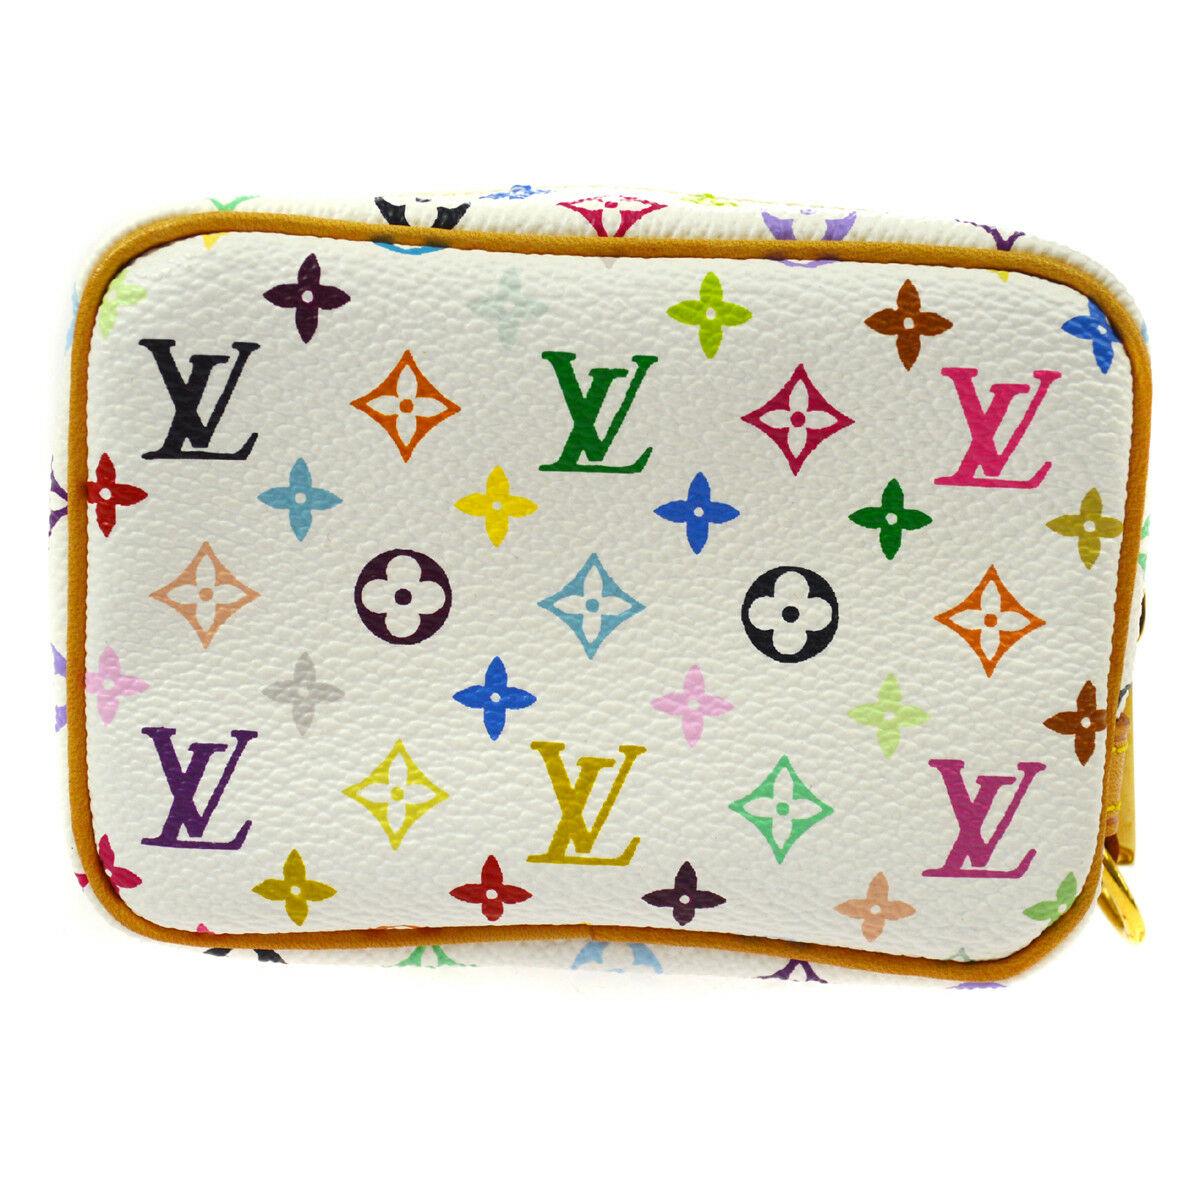 Louis Vuitton Multi Color White Small Mini Evening Clutch Wristlet Pochette Bag 

Monogram canvas
Leather
Gold tone hardware
Woven lining
Made in France
Measures 4